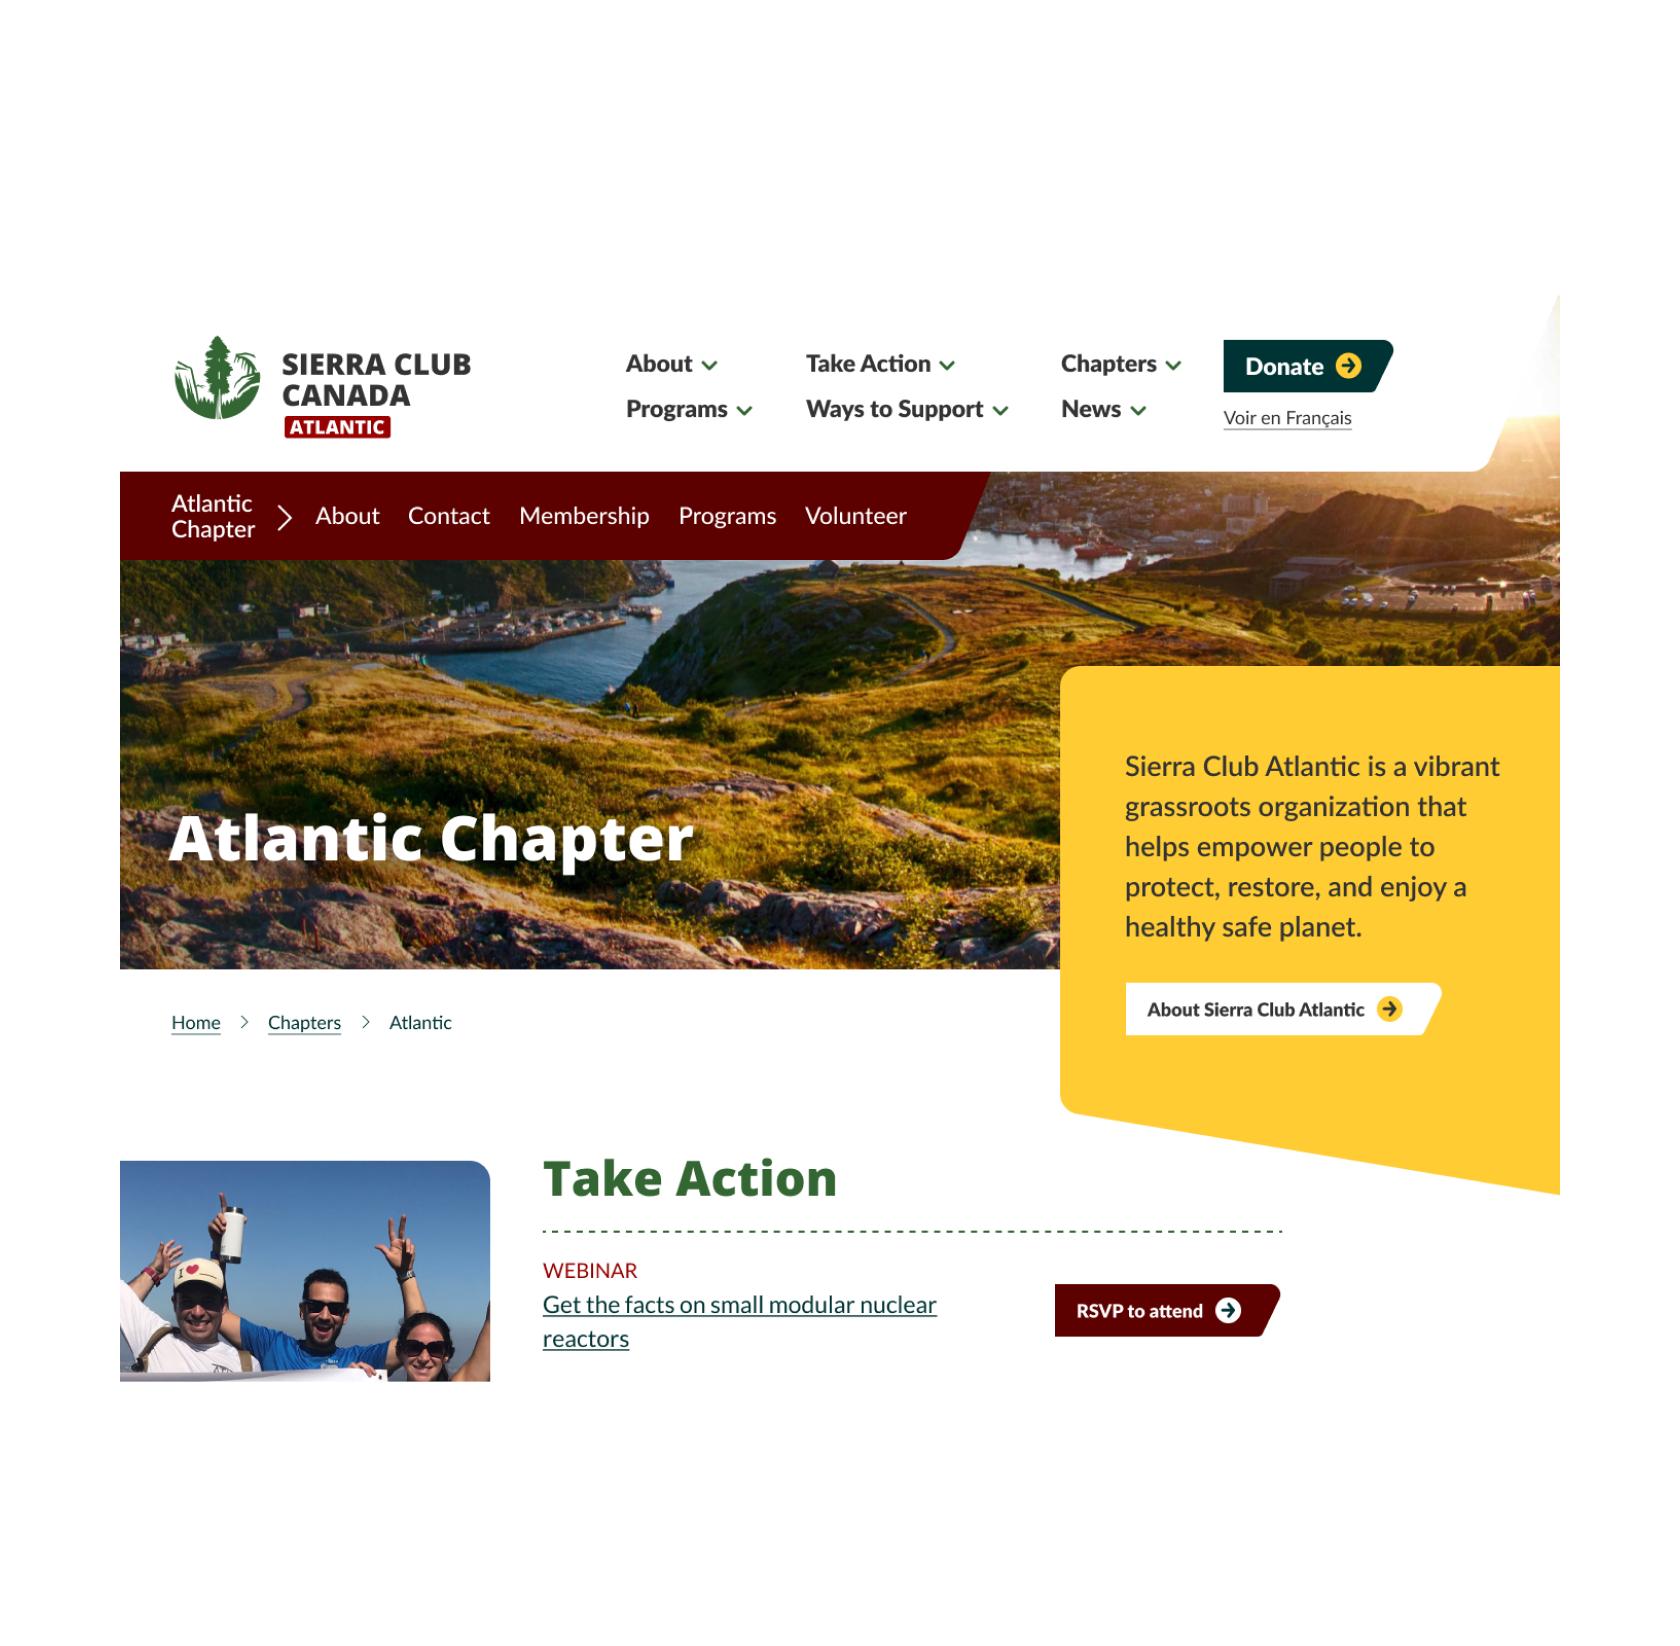 Sierra Club Atlantic Chapter's homepage. While similar to the homepage, it's customized content so that it's just specific to Atlantic Canada.